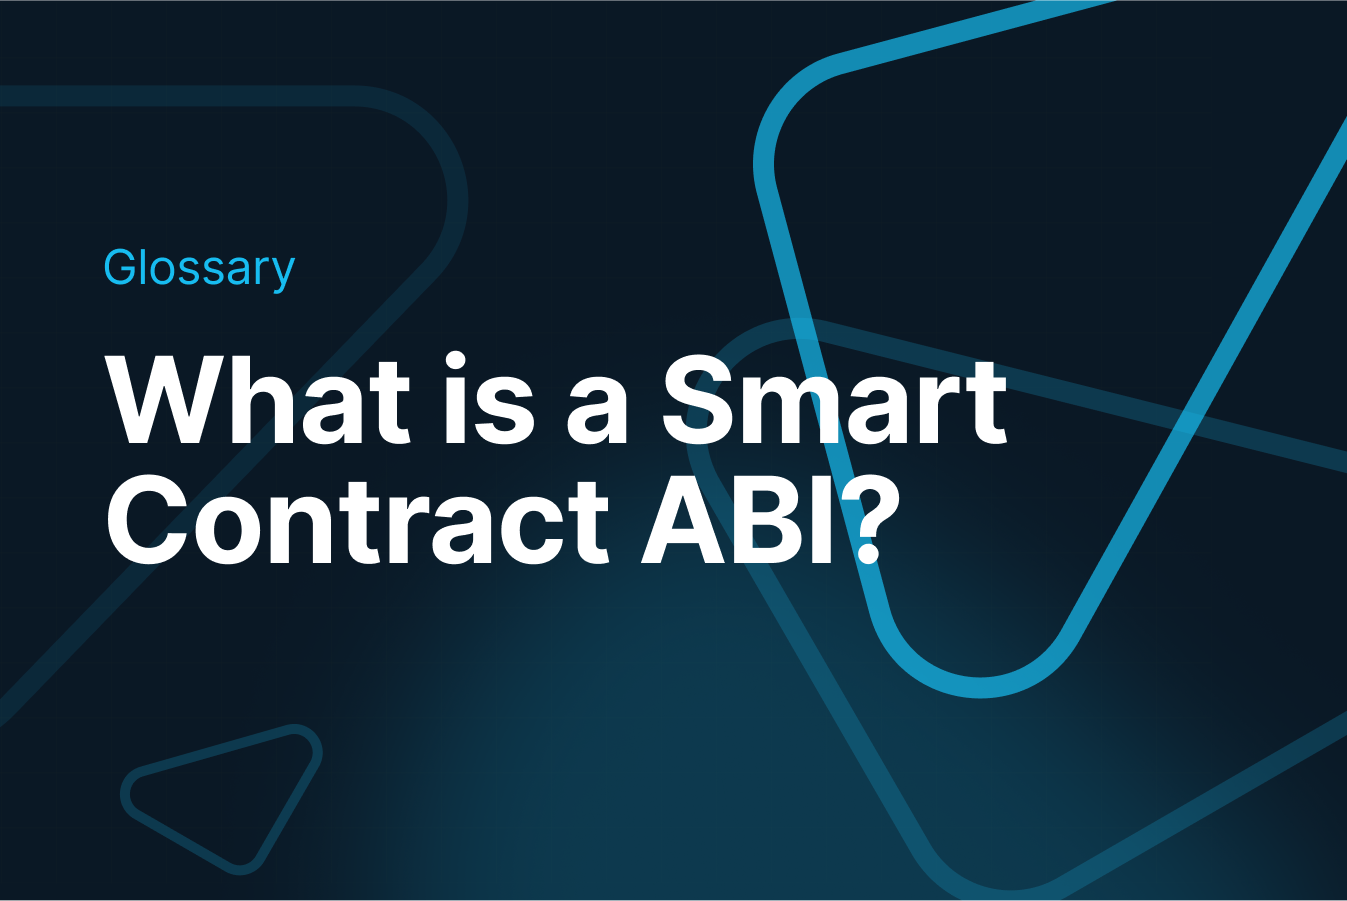 What is the ABI of a Smart Contract?